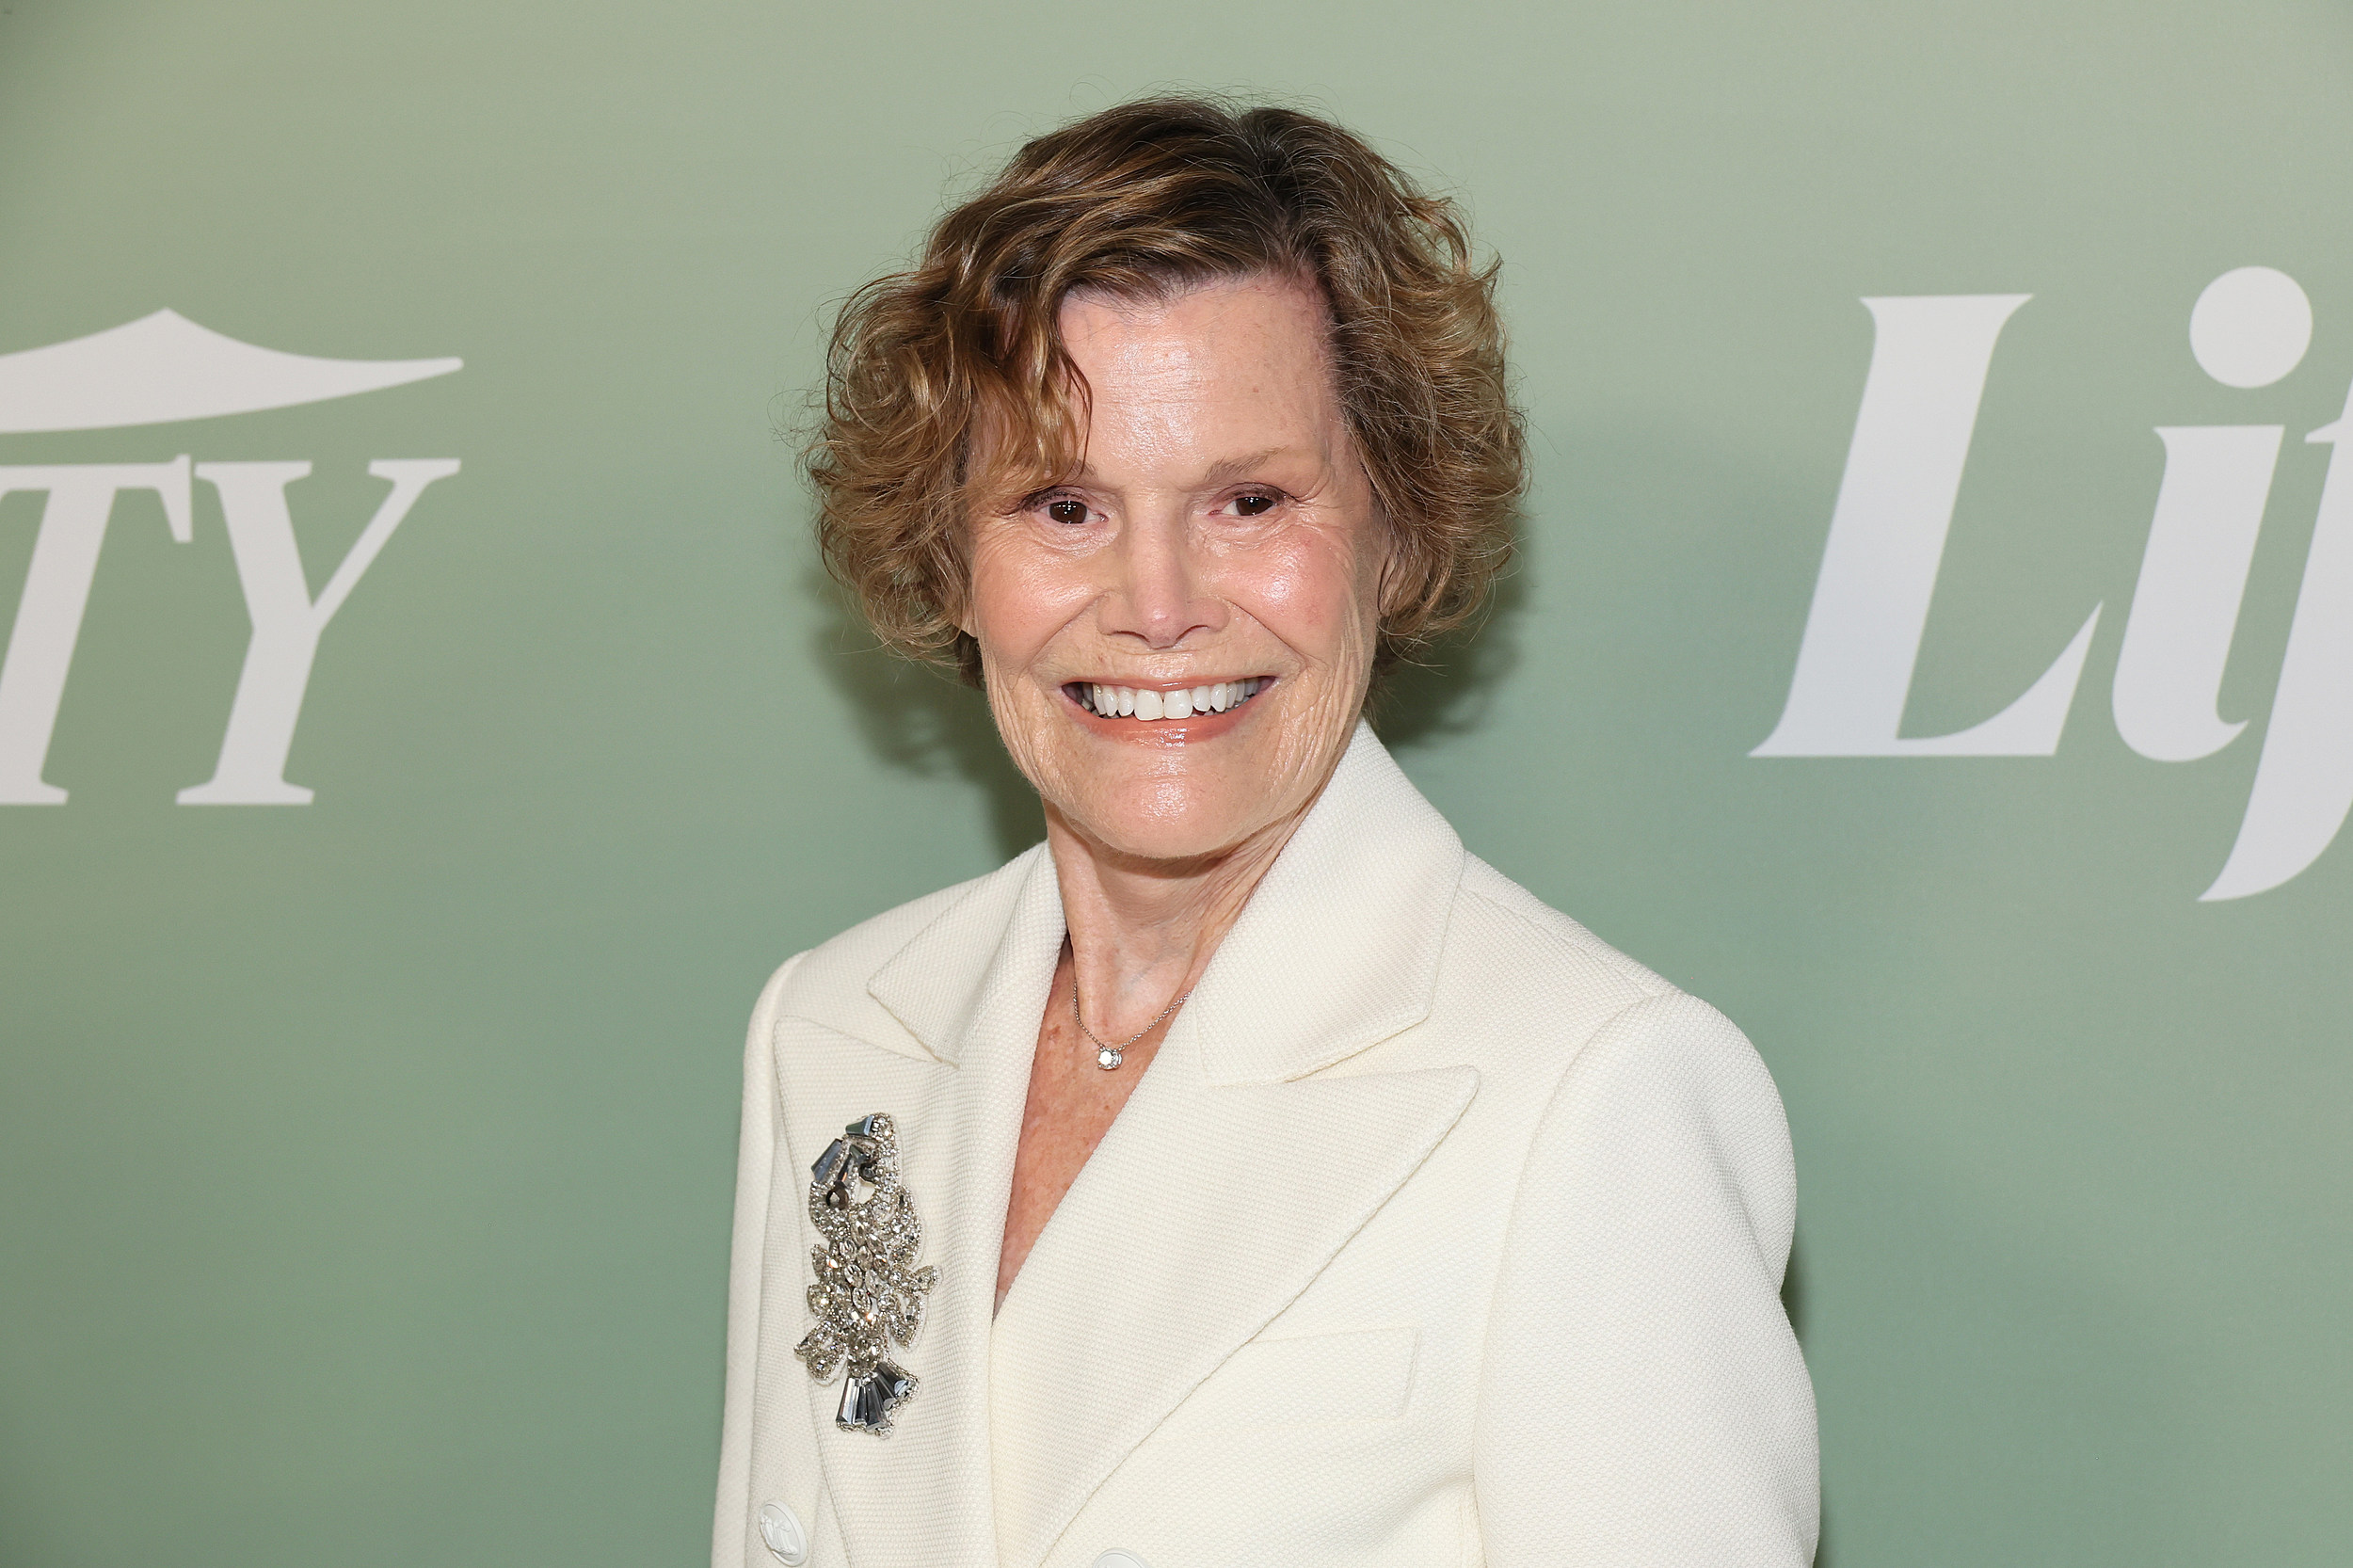 Documentary on beloved NJ native Judy Blume now streaming